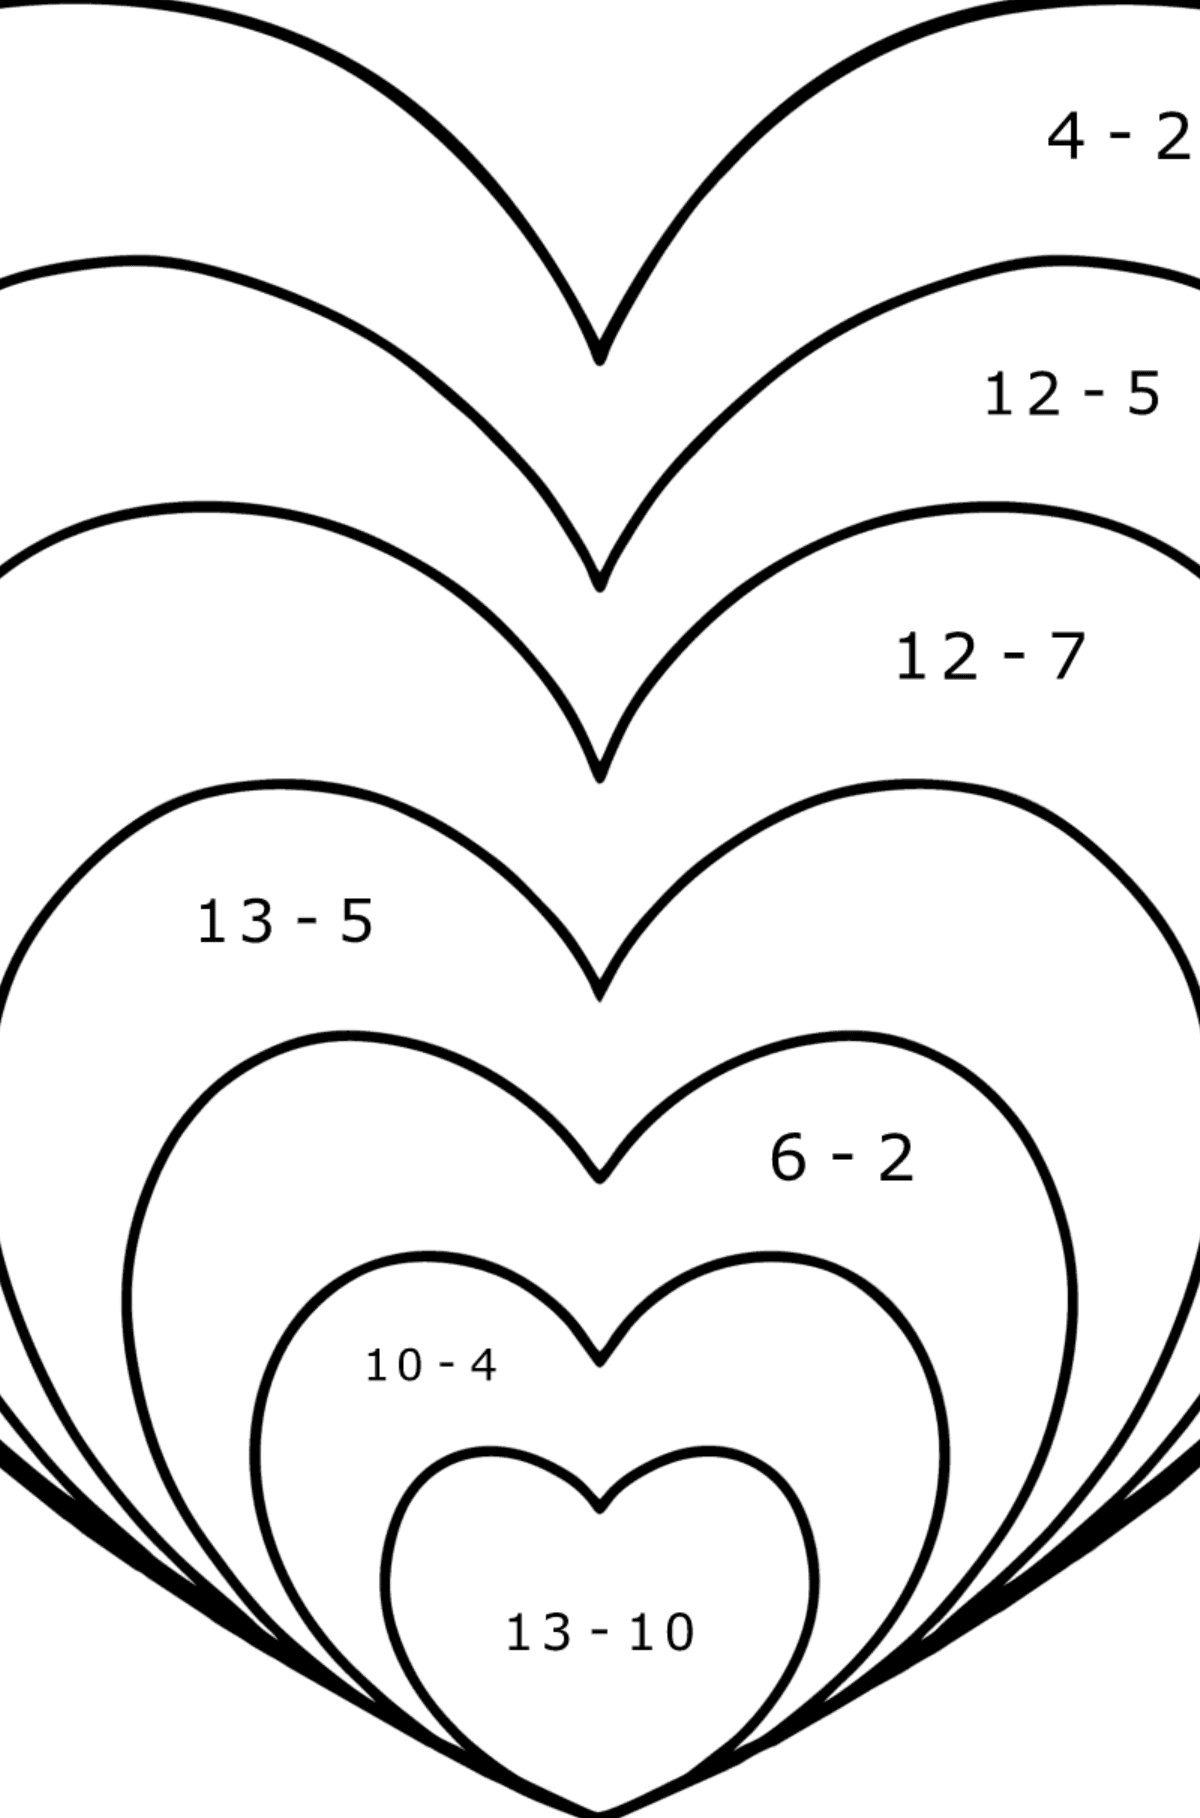 Simple Zen heart coloring page - Math Coloring - Subtraction for Kids